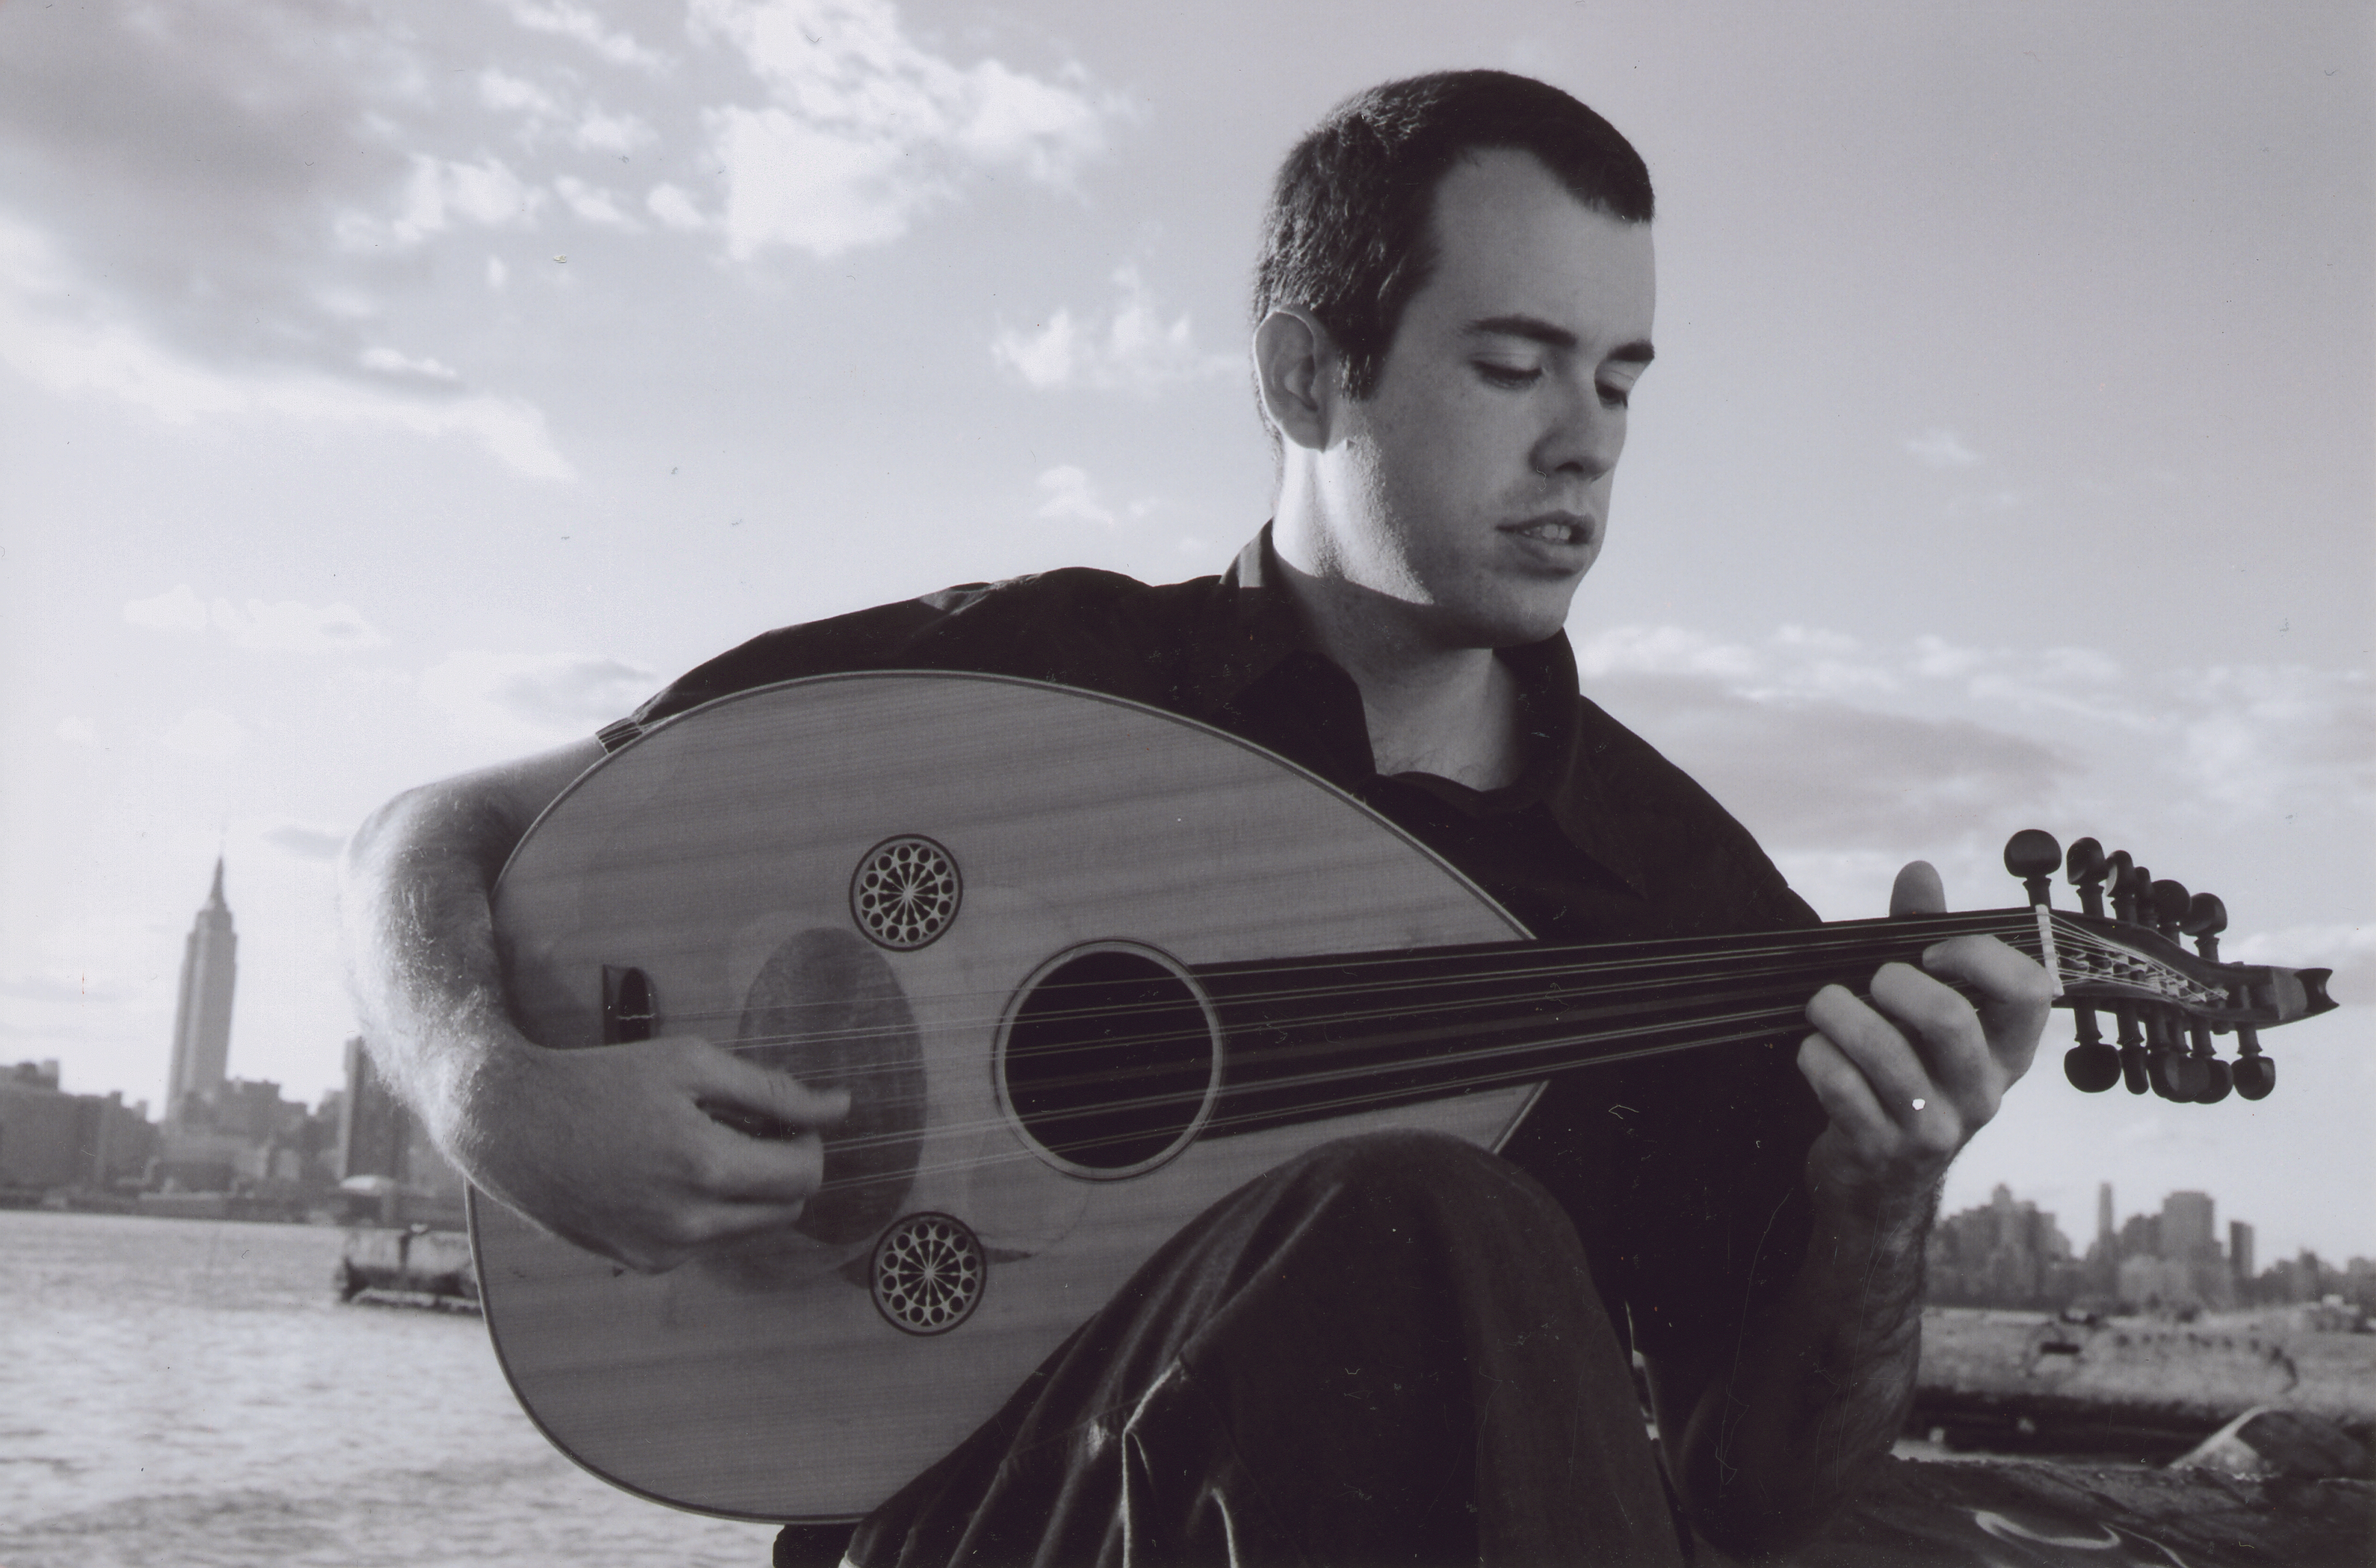 Brian Prunka playing oud by the East River in 2004, shortly after moving to NY